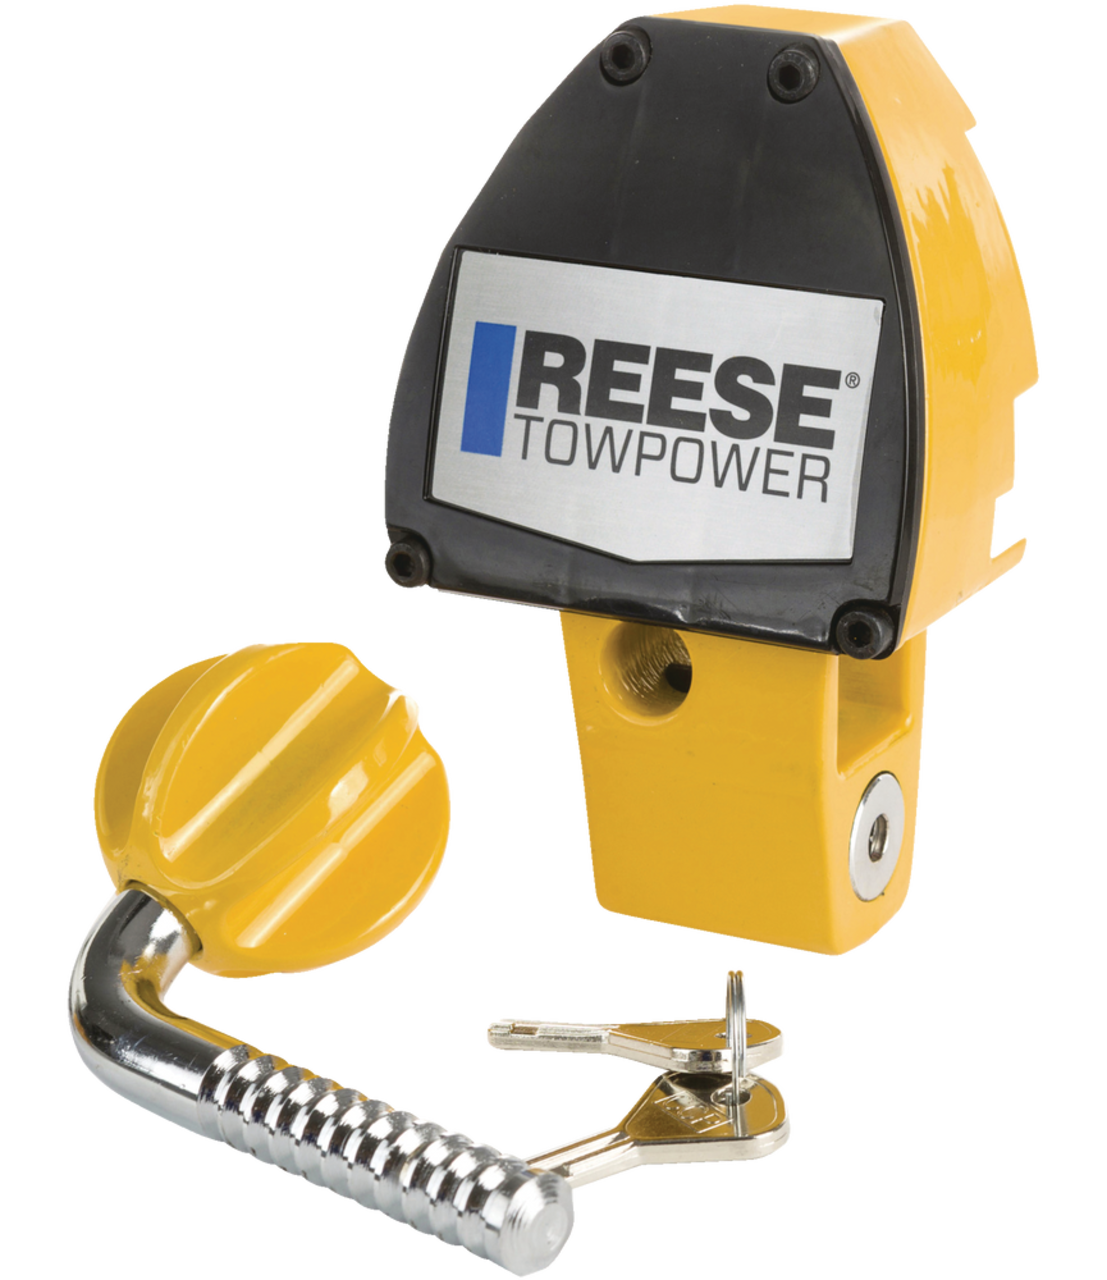 Reese Towpower Professional Coupler Lock